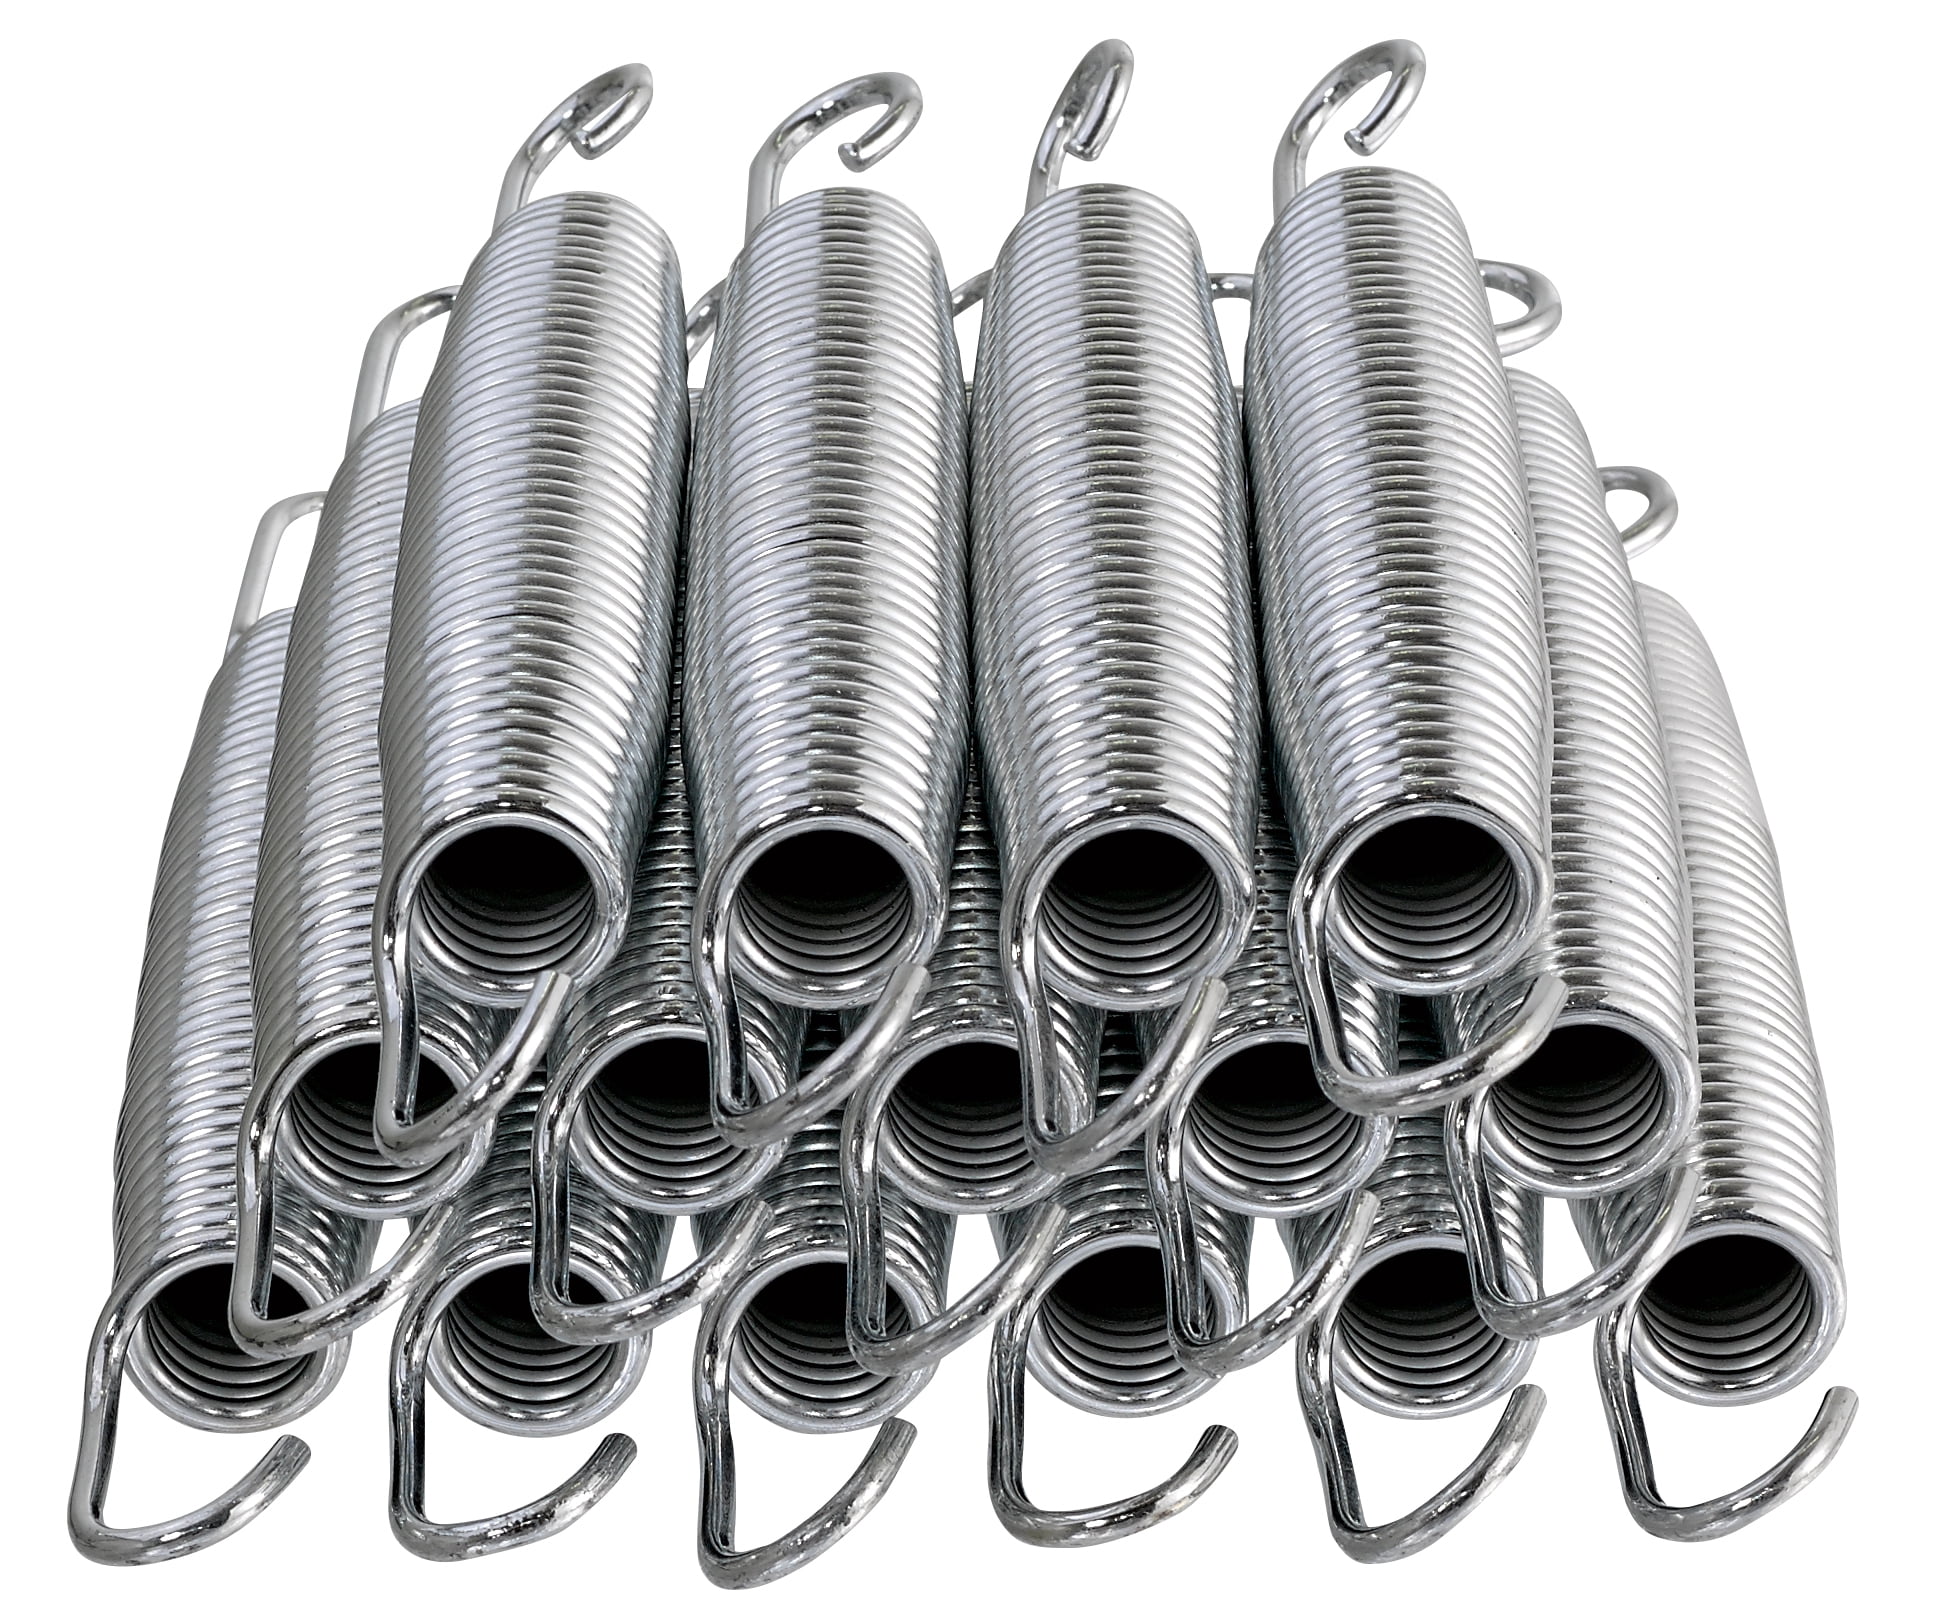 50x Trampoline Springs 5.5" Inch Heavy-Duty Galvanized Steel Replacement Kit US 